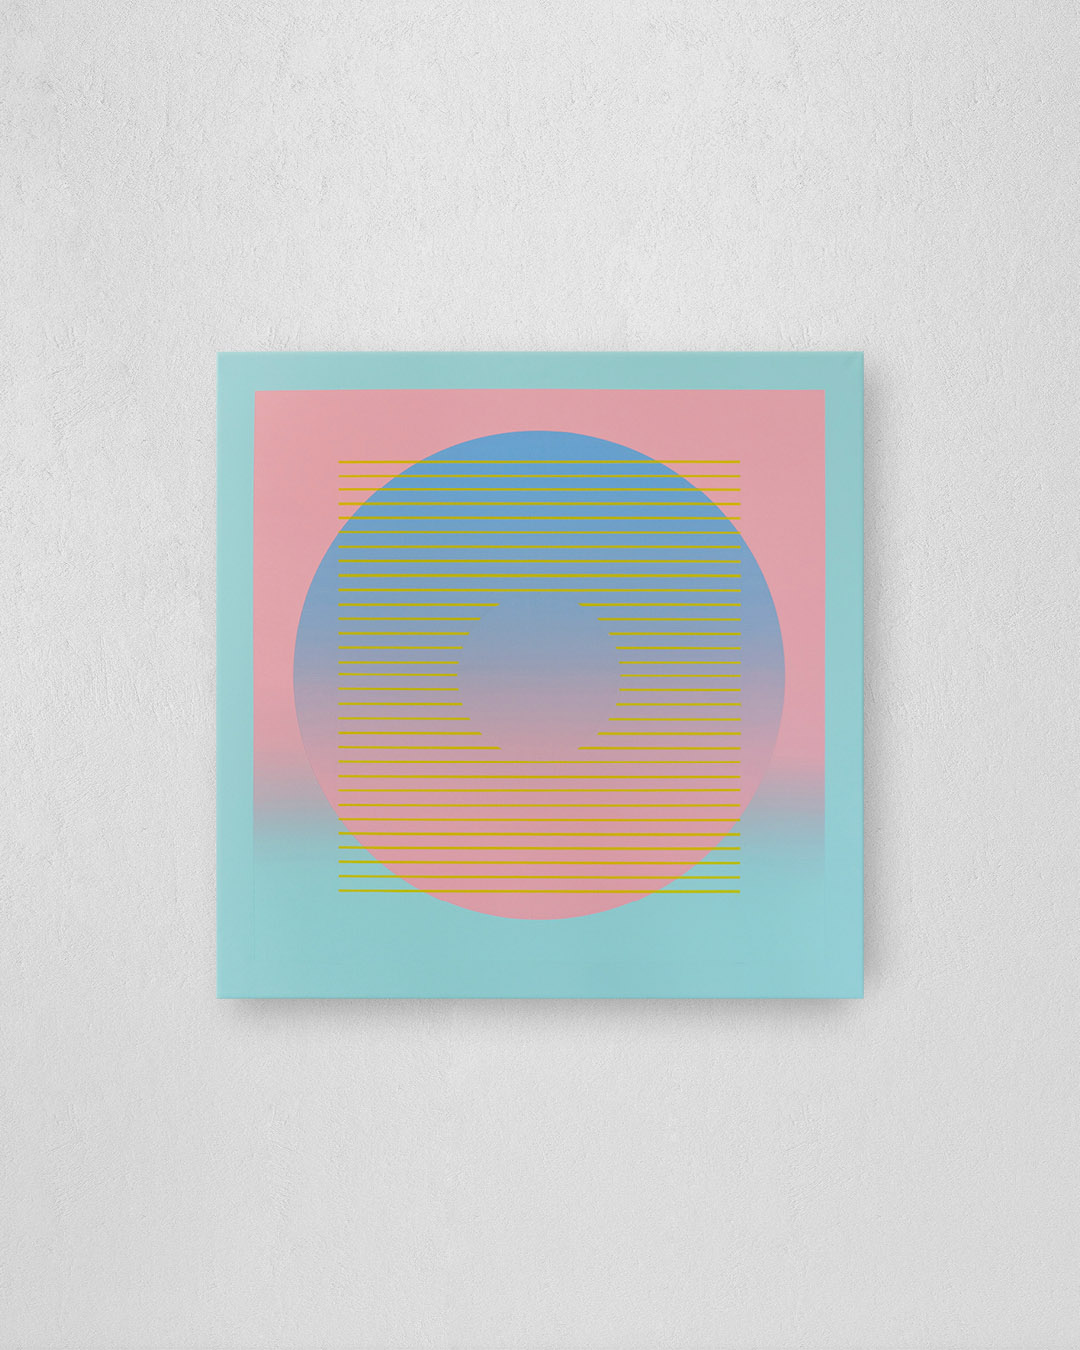 Circle with gradient and parallel lines, completed in 2020 with acrylic paints and markers on a 80 x 80 cm canvas with colour-matched floater frame.